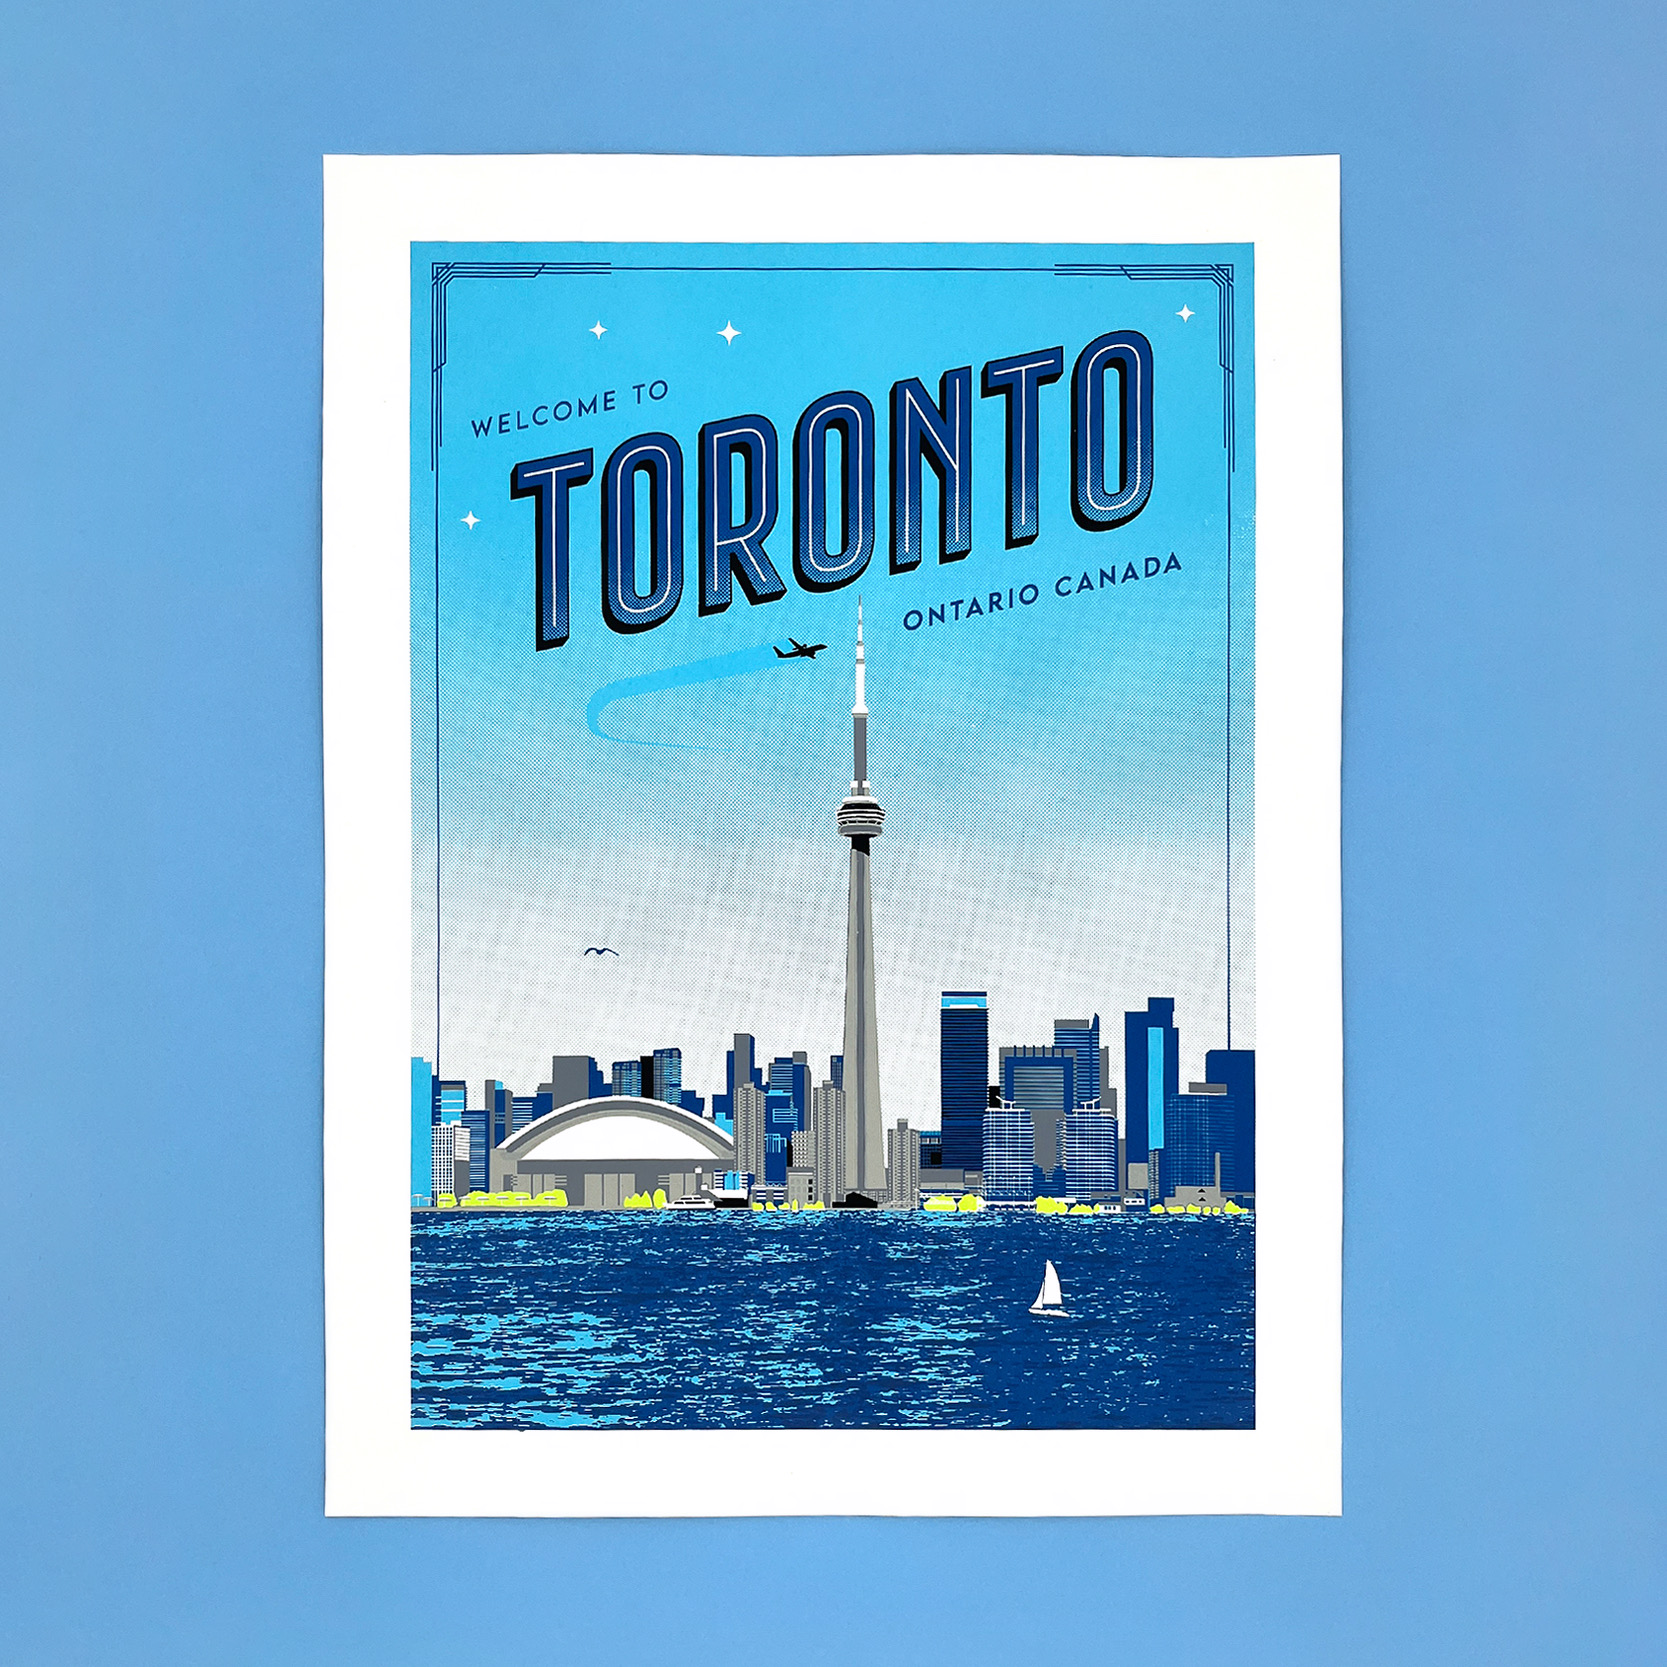 Kid Icarus hand screen printed print "Welcome to Toronto" illustrates the city's iconic skyline, featuring the CN Tower, Rogers Centre, etc